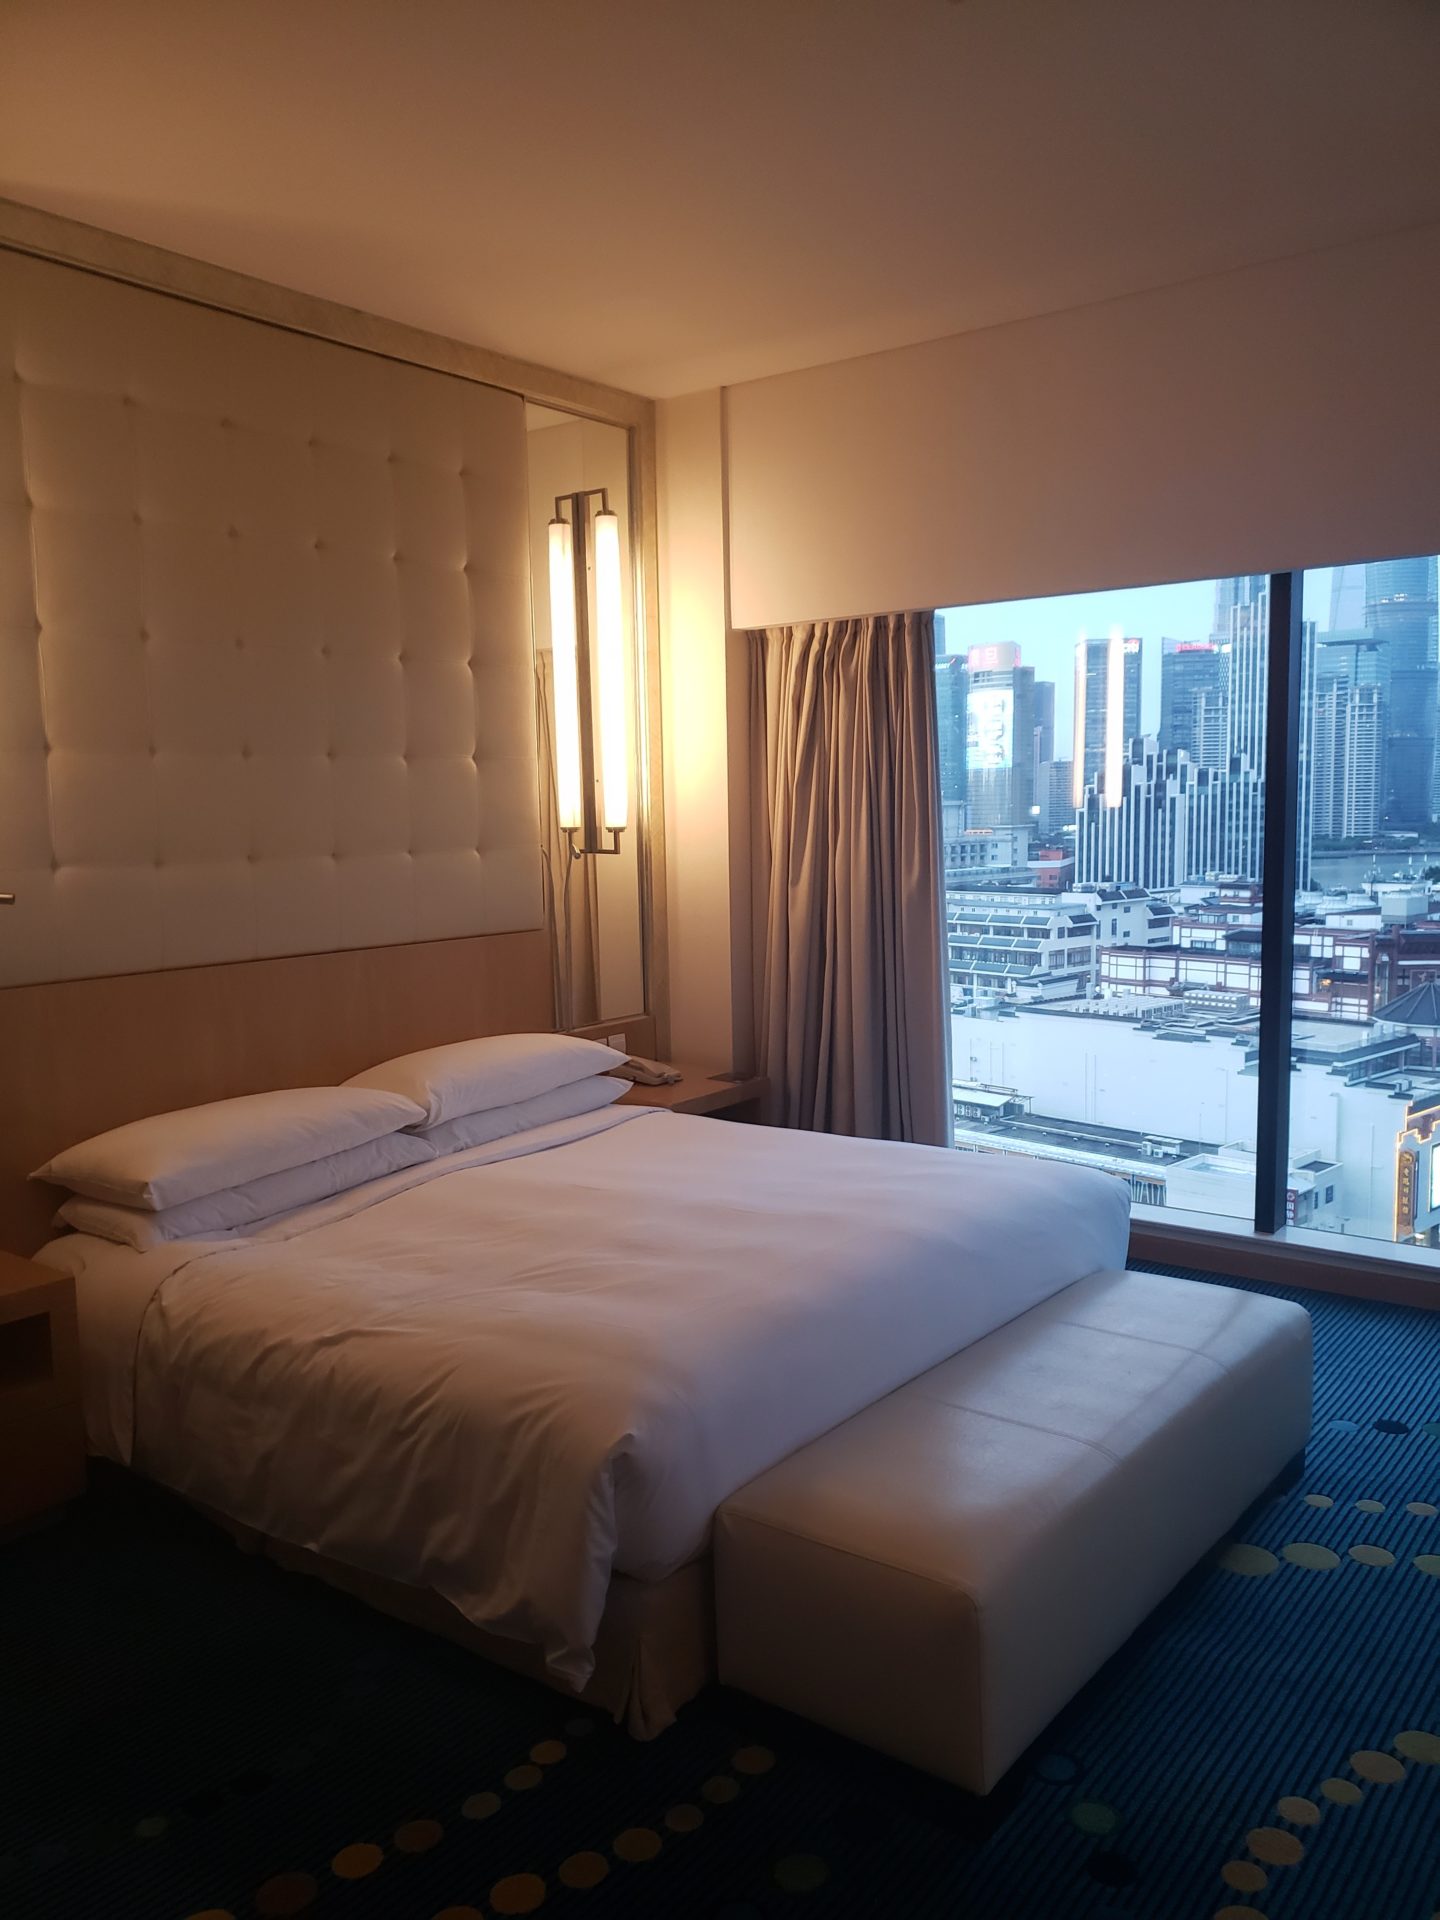 a bed in a room with a window and city view